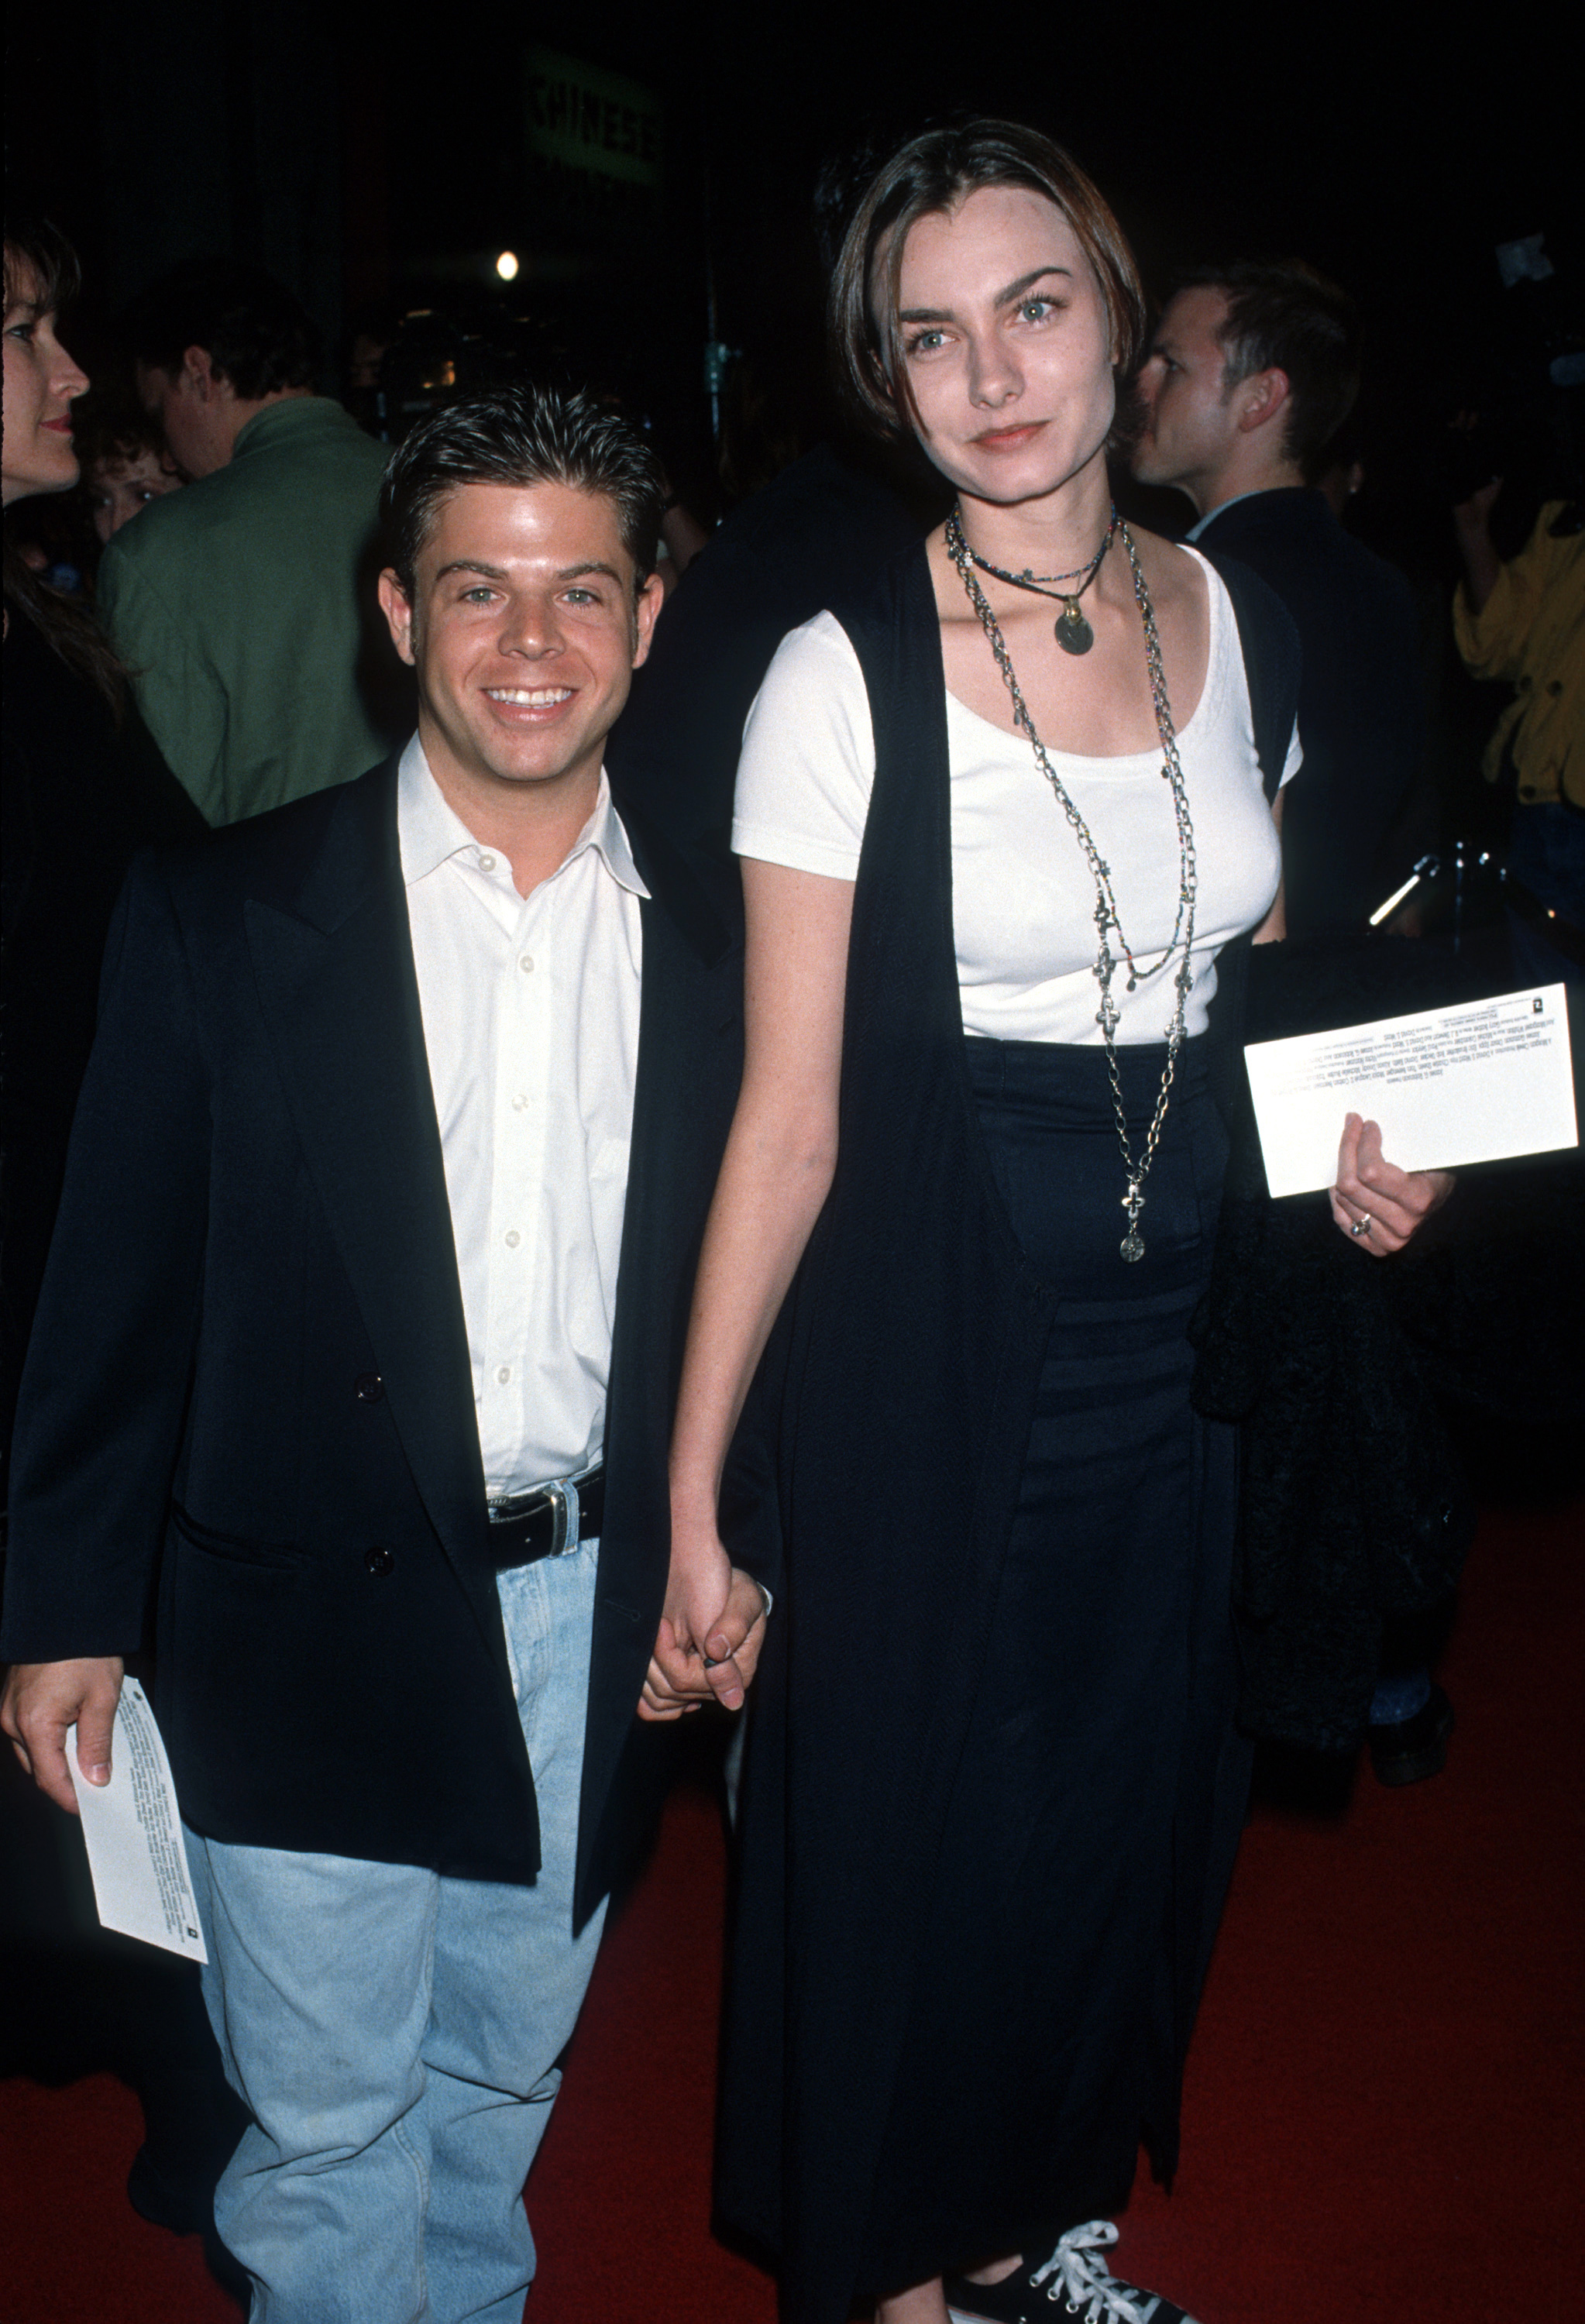 Adam Rich and guest during the premiere of "Major League 2" at Mann's Chinese Theater on March 28, 1994 in Hollywood, California | Source: Getty Images